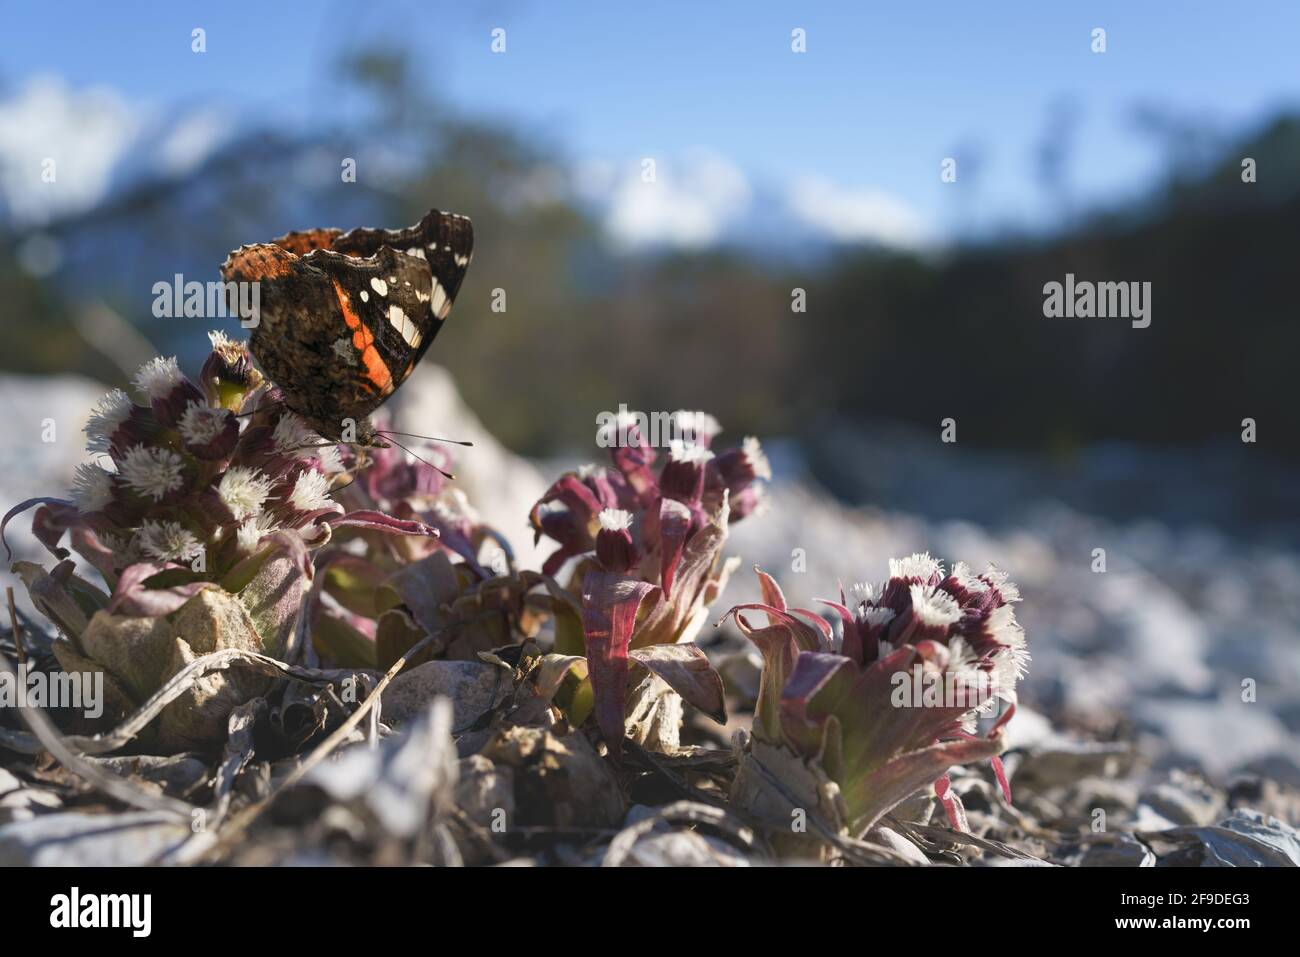 Red Admiral butterfly - Vanessa atalanta - sitting on purple blooming thistle in alpine landscape, Austria Stock Photo